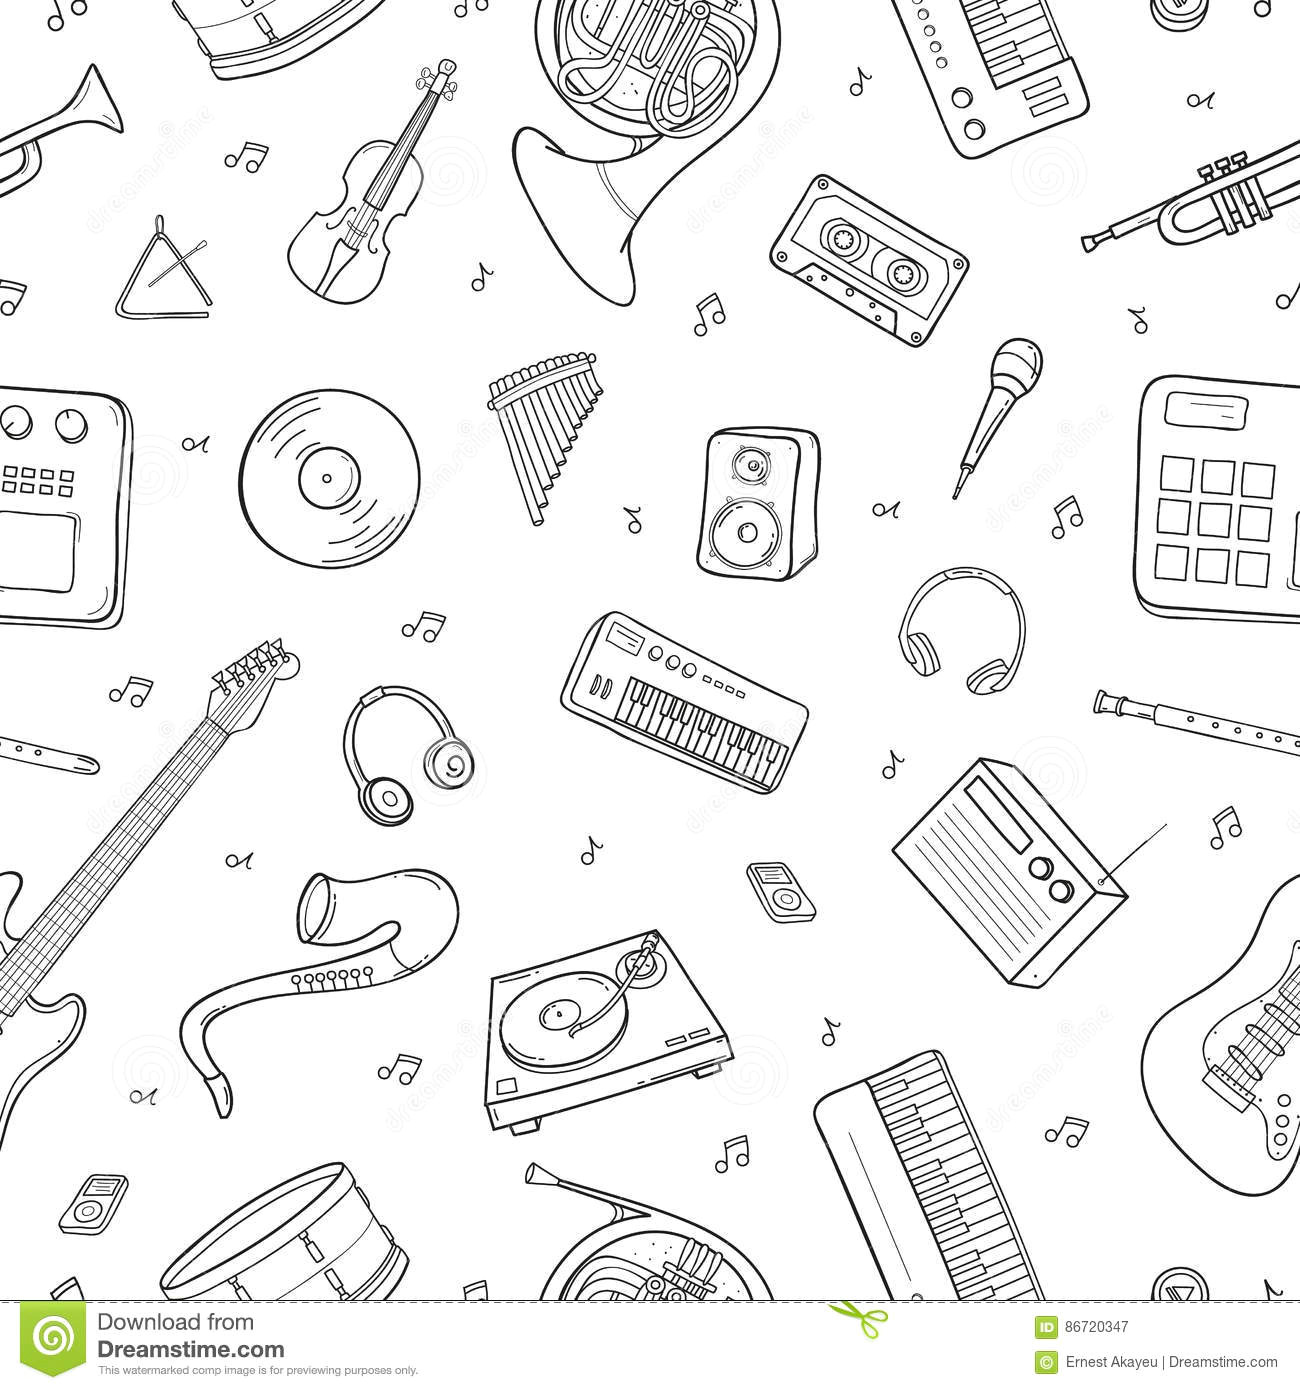 Drawings Of Hands Playing Instruments Seamless Pattern with Various Musical Instruments Symbols Objects